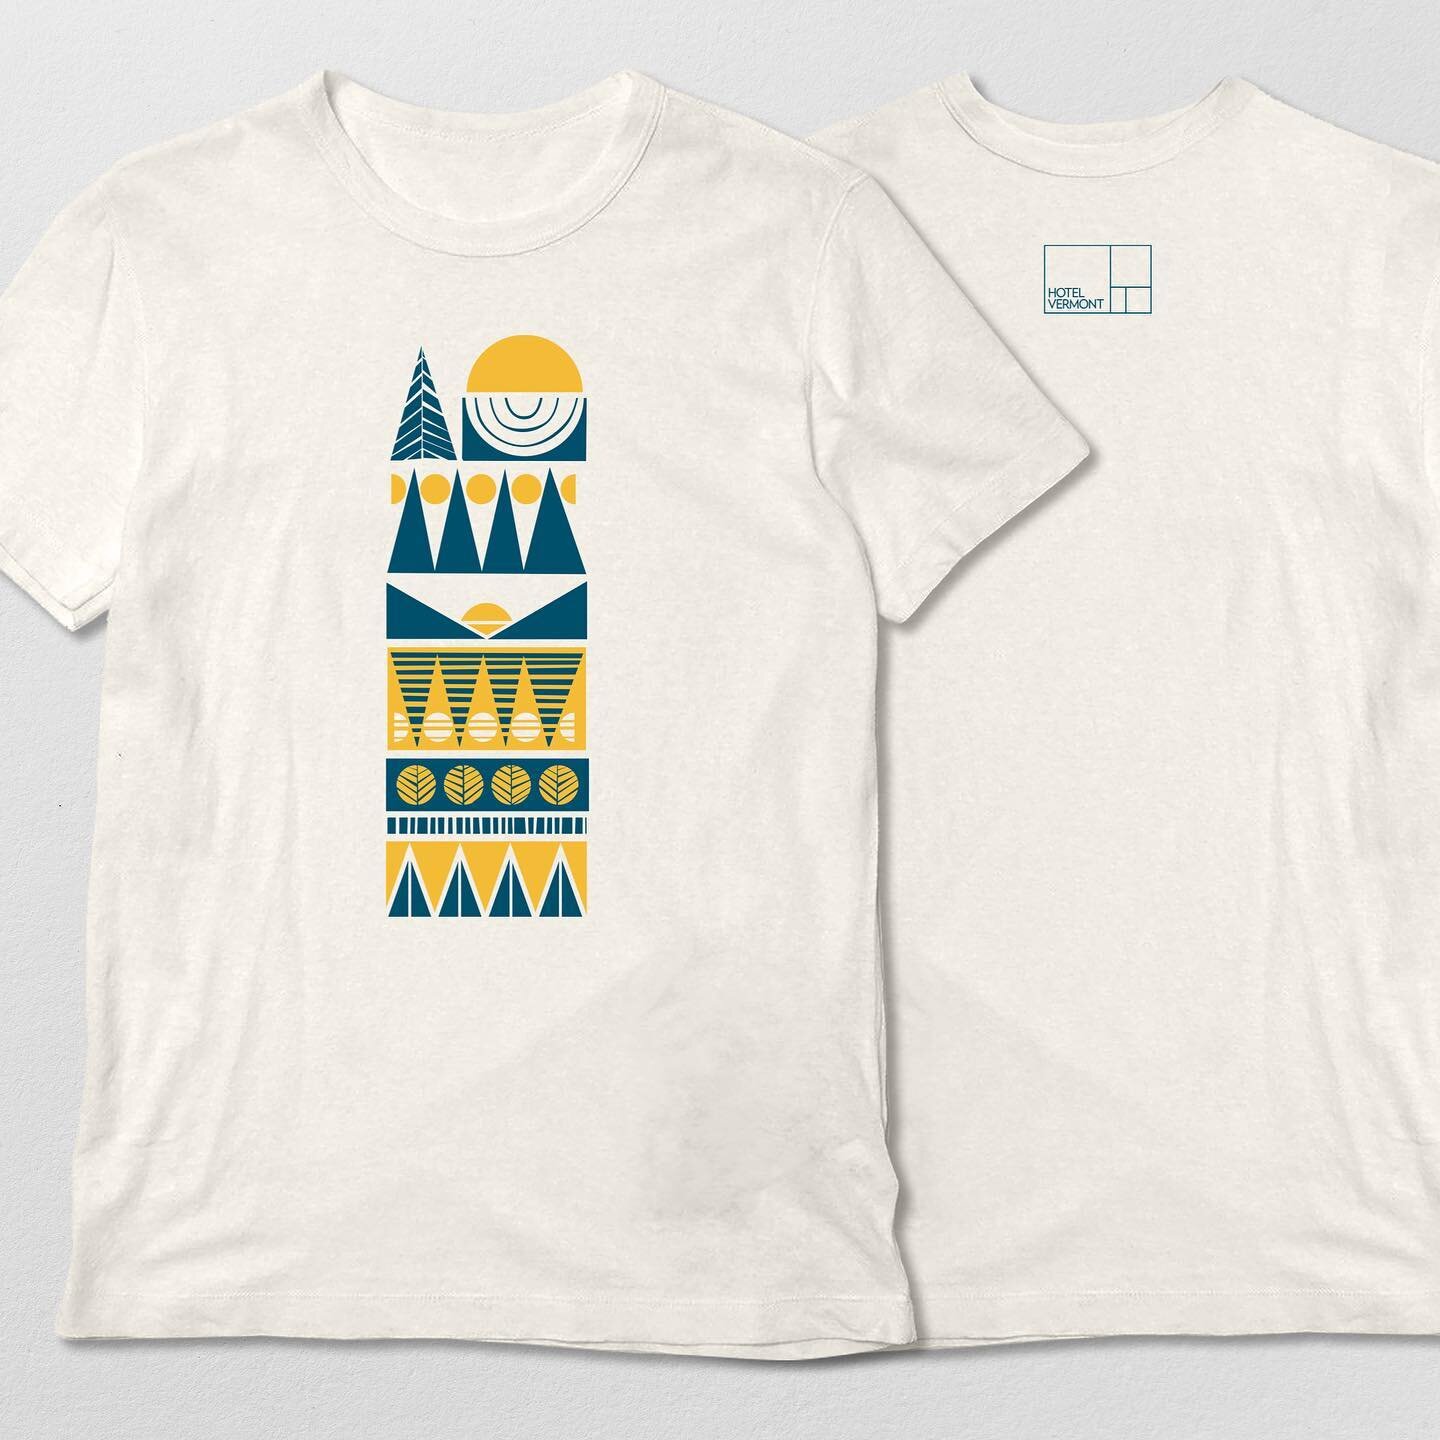 Apparel designs for @hotelvermont Available at their online store.
⠀⠀⠀⠀⠀⠀⠀⠀⠀
#apparel #tshirt #tshirtgraphic #graphic #illustration #design #vermont #hotelvermont #moderatebreezedesign